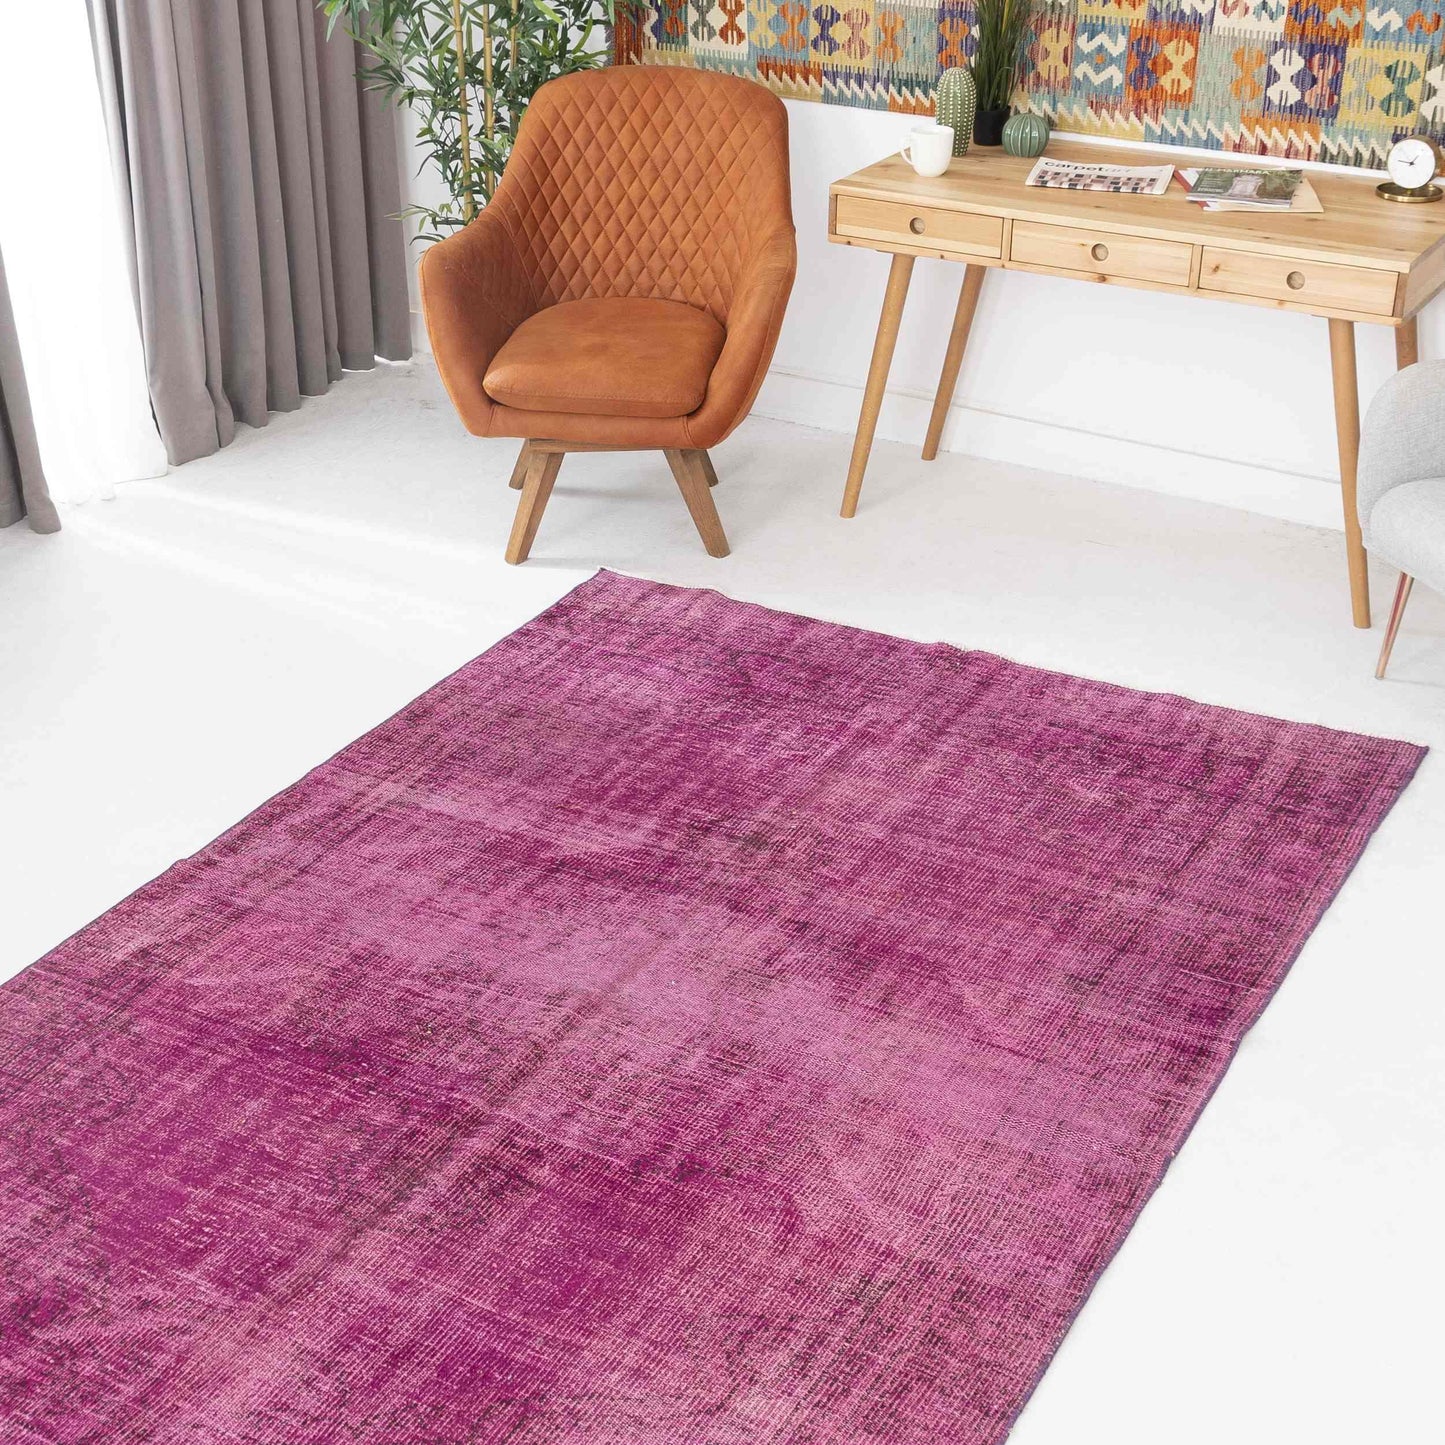 Oriental Rug Vintage Hand Knotted Wool On Cotton 176 x 260 Cm - 5' 10'' x 8' 7'' Pink C004 ER12